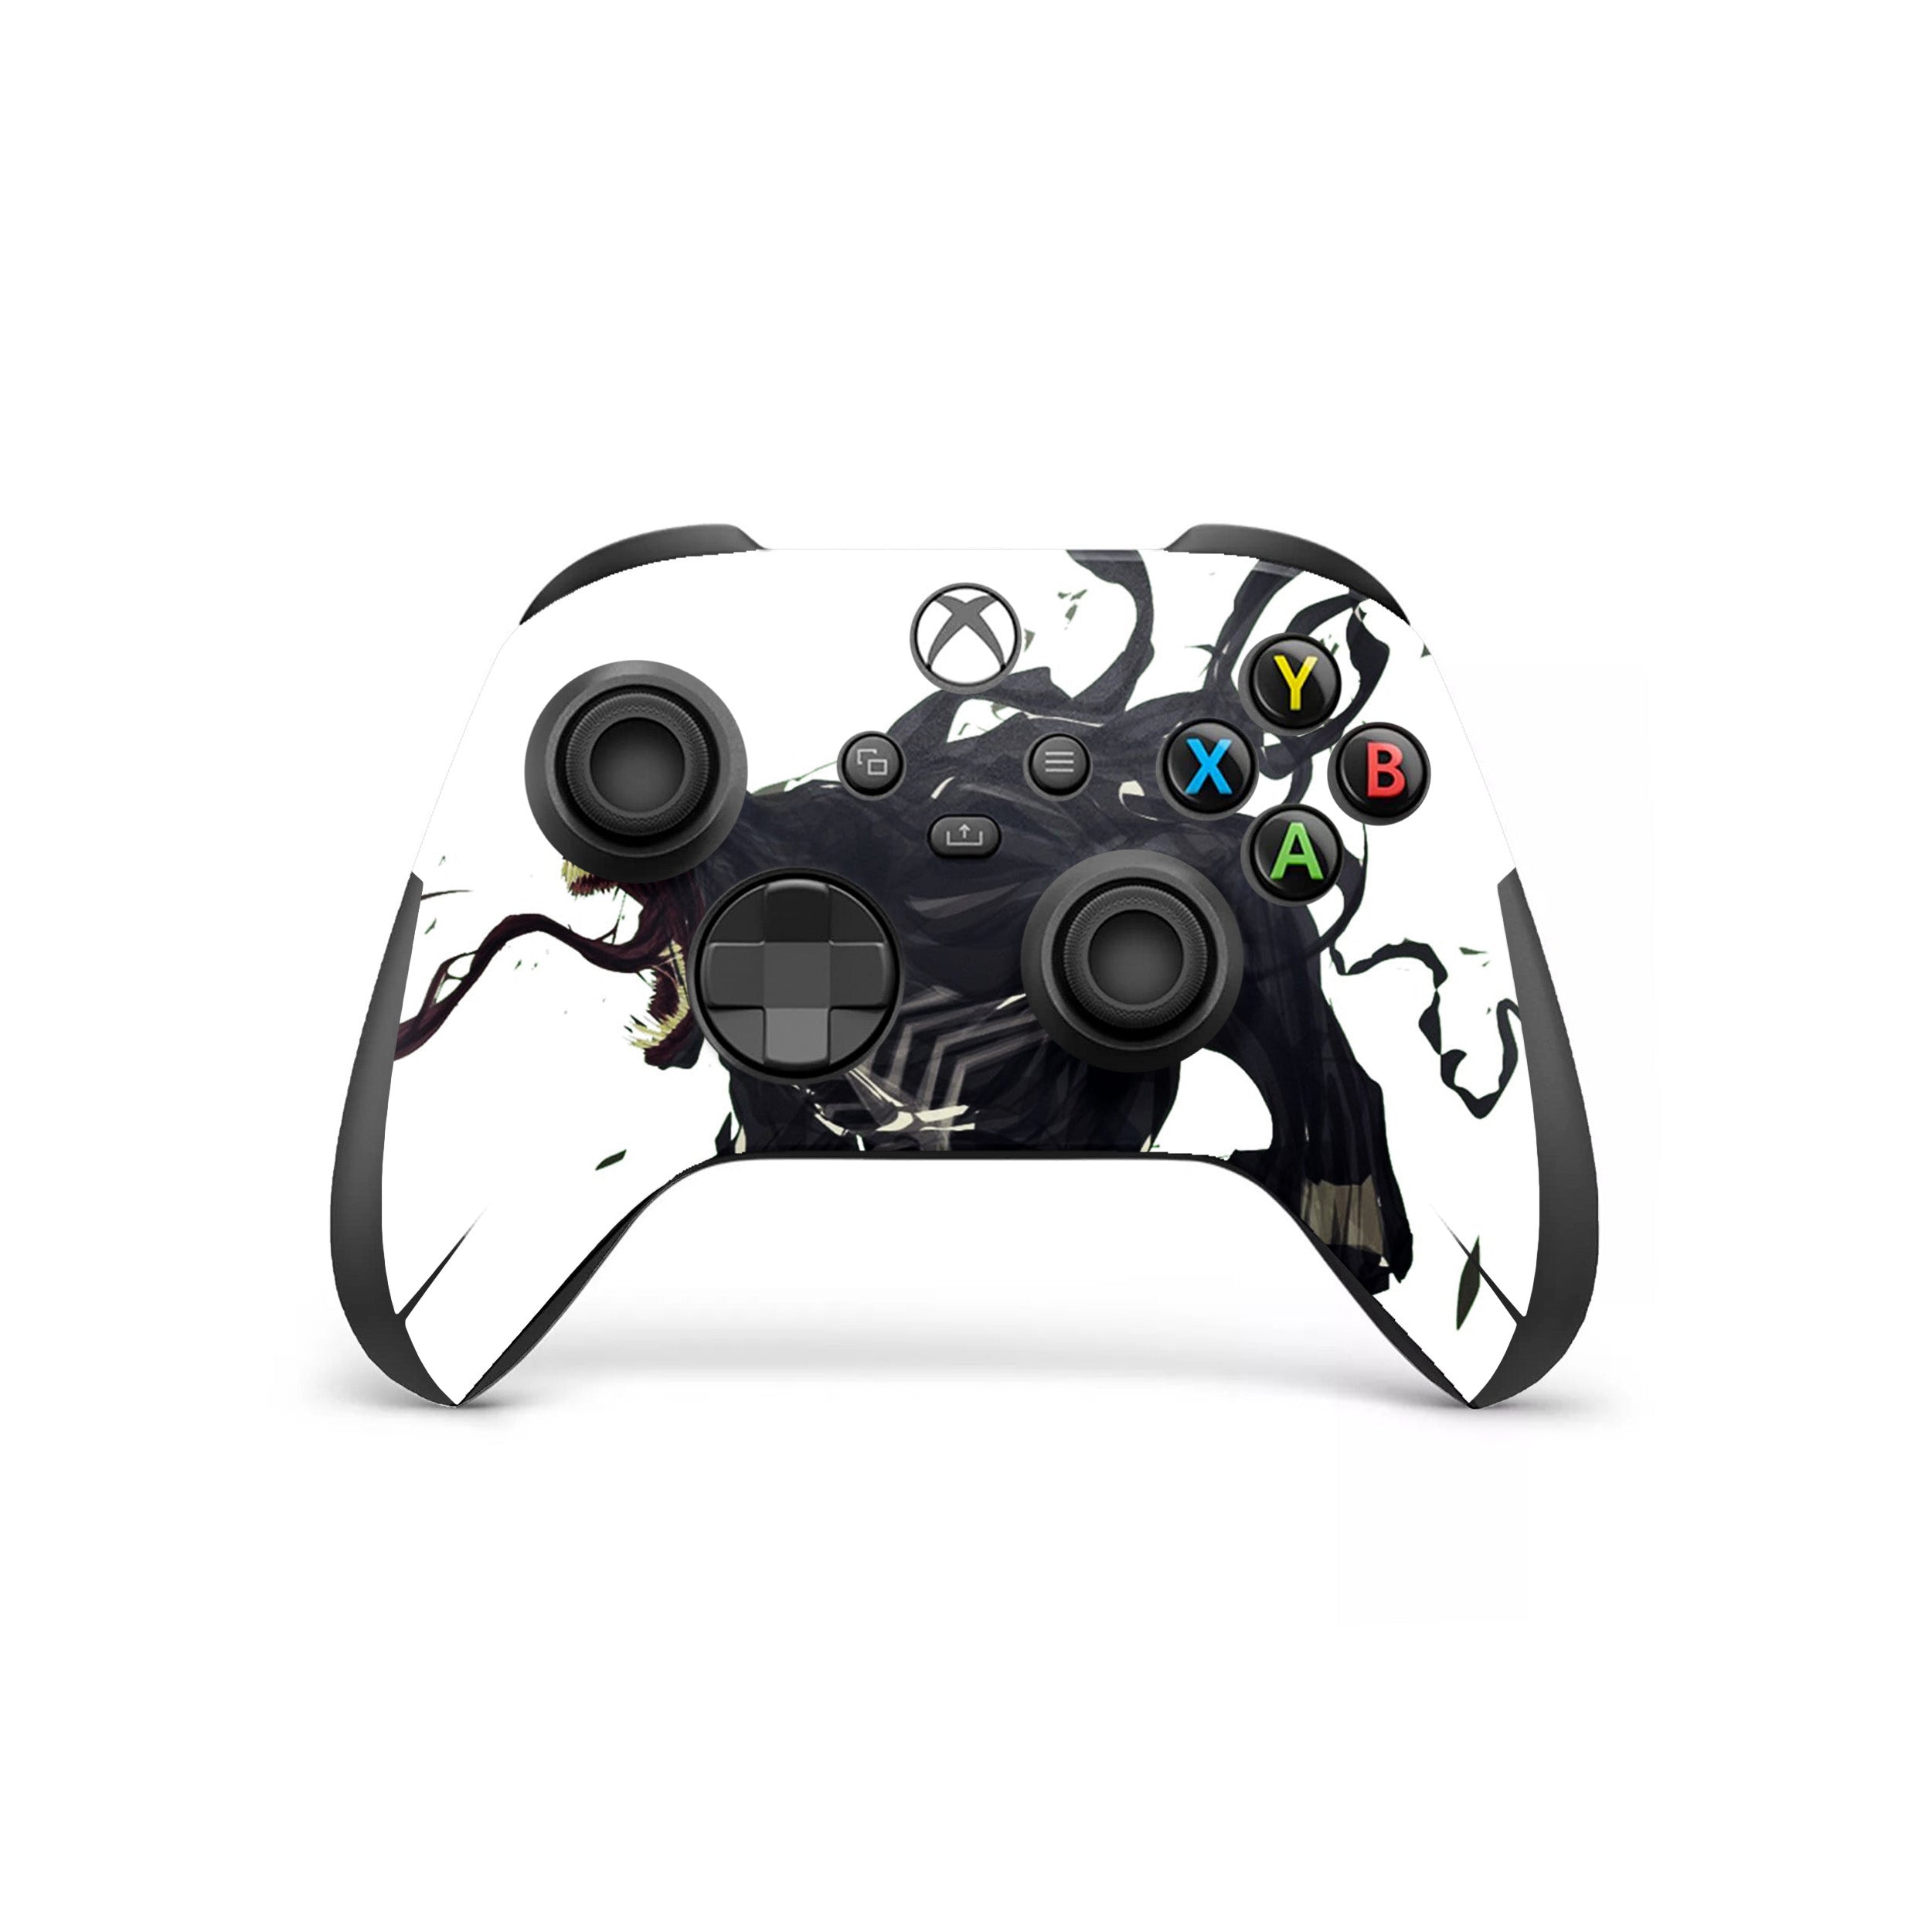 A video game skin featuring a Marvel Venom design for the Xbox Wireless Controller.